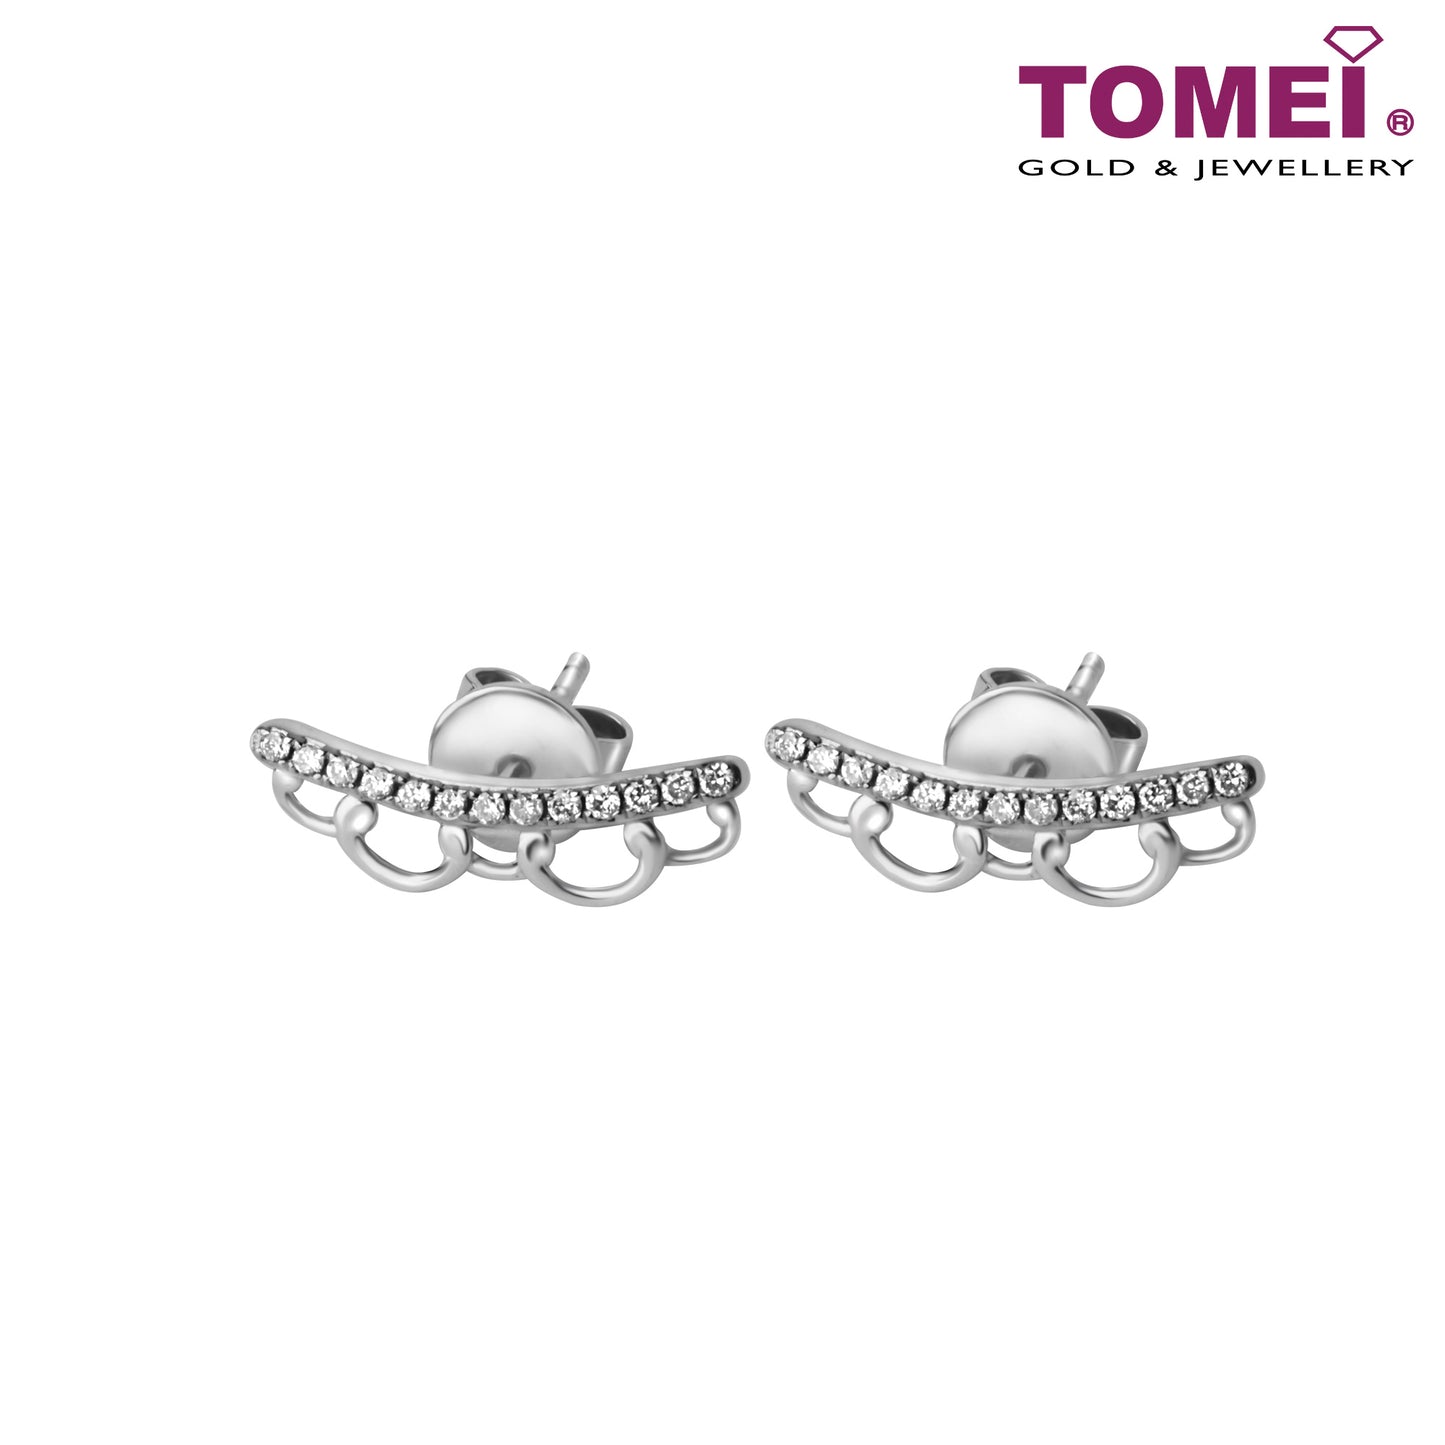 TOMEI Diamond Earrings With Style, White Gold 375 (17751EWD9WP)